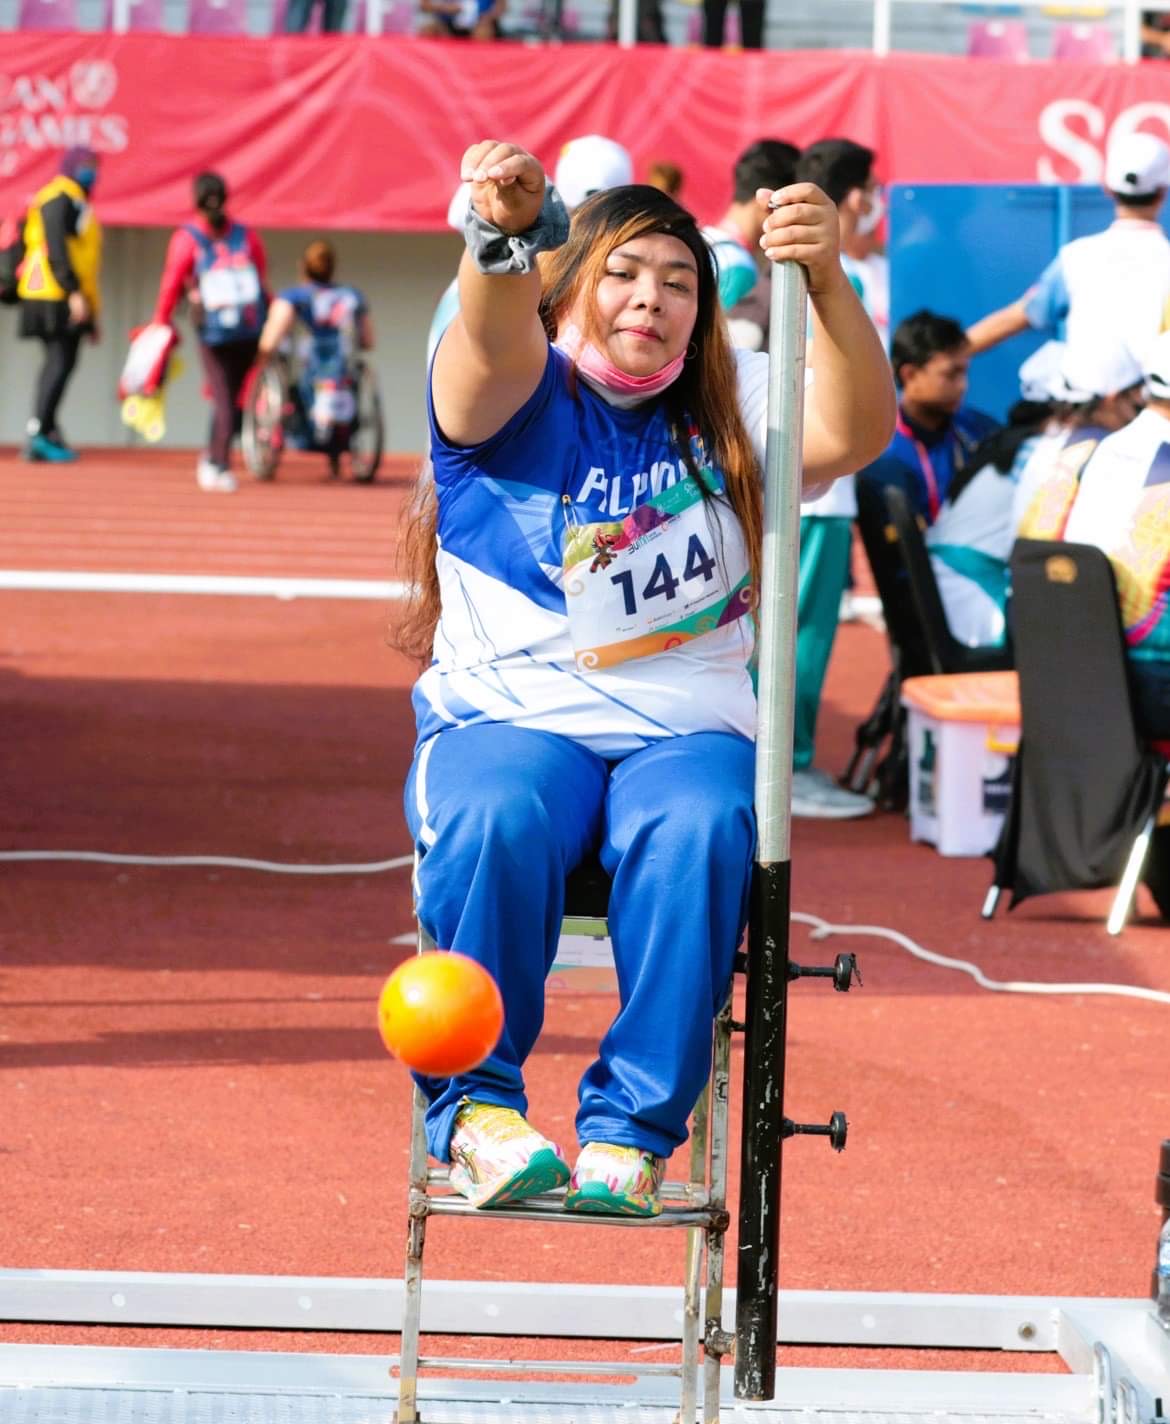 GOLDEN THROW.  Cendy Asusano shows winning form in ruling the women’s shot put F54 in athletic action at the Manahan Stadium in the 11th ASEAN Para Games Wednesday in Surakarta, Indonesia.